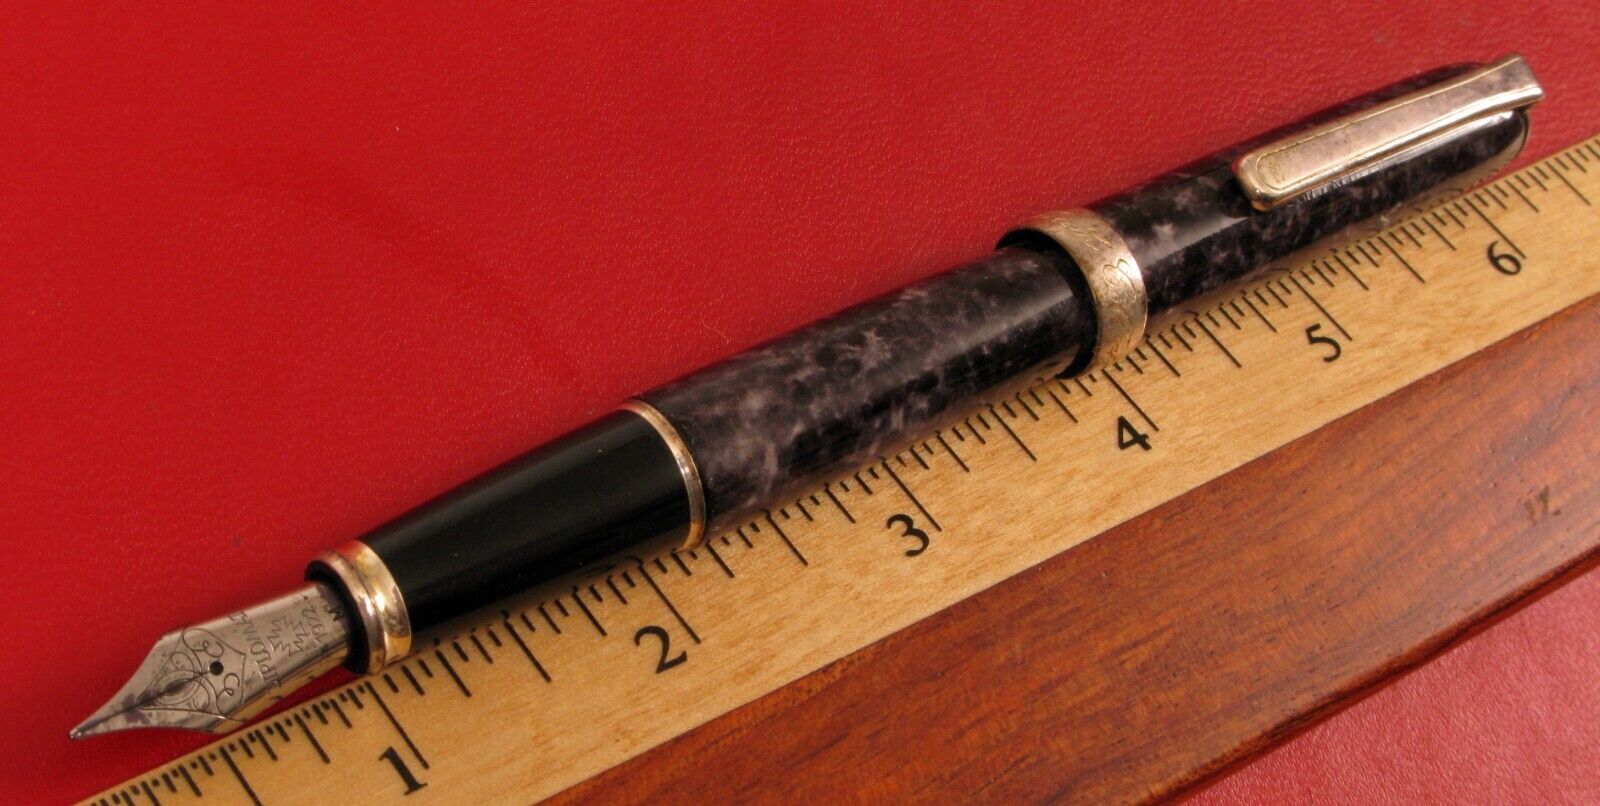 FABULOUS VINTAGE DIPLOMAT MADE IN GERMANY FOUNTAIN PEN AWESOME QUALITY 